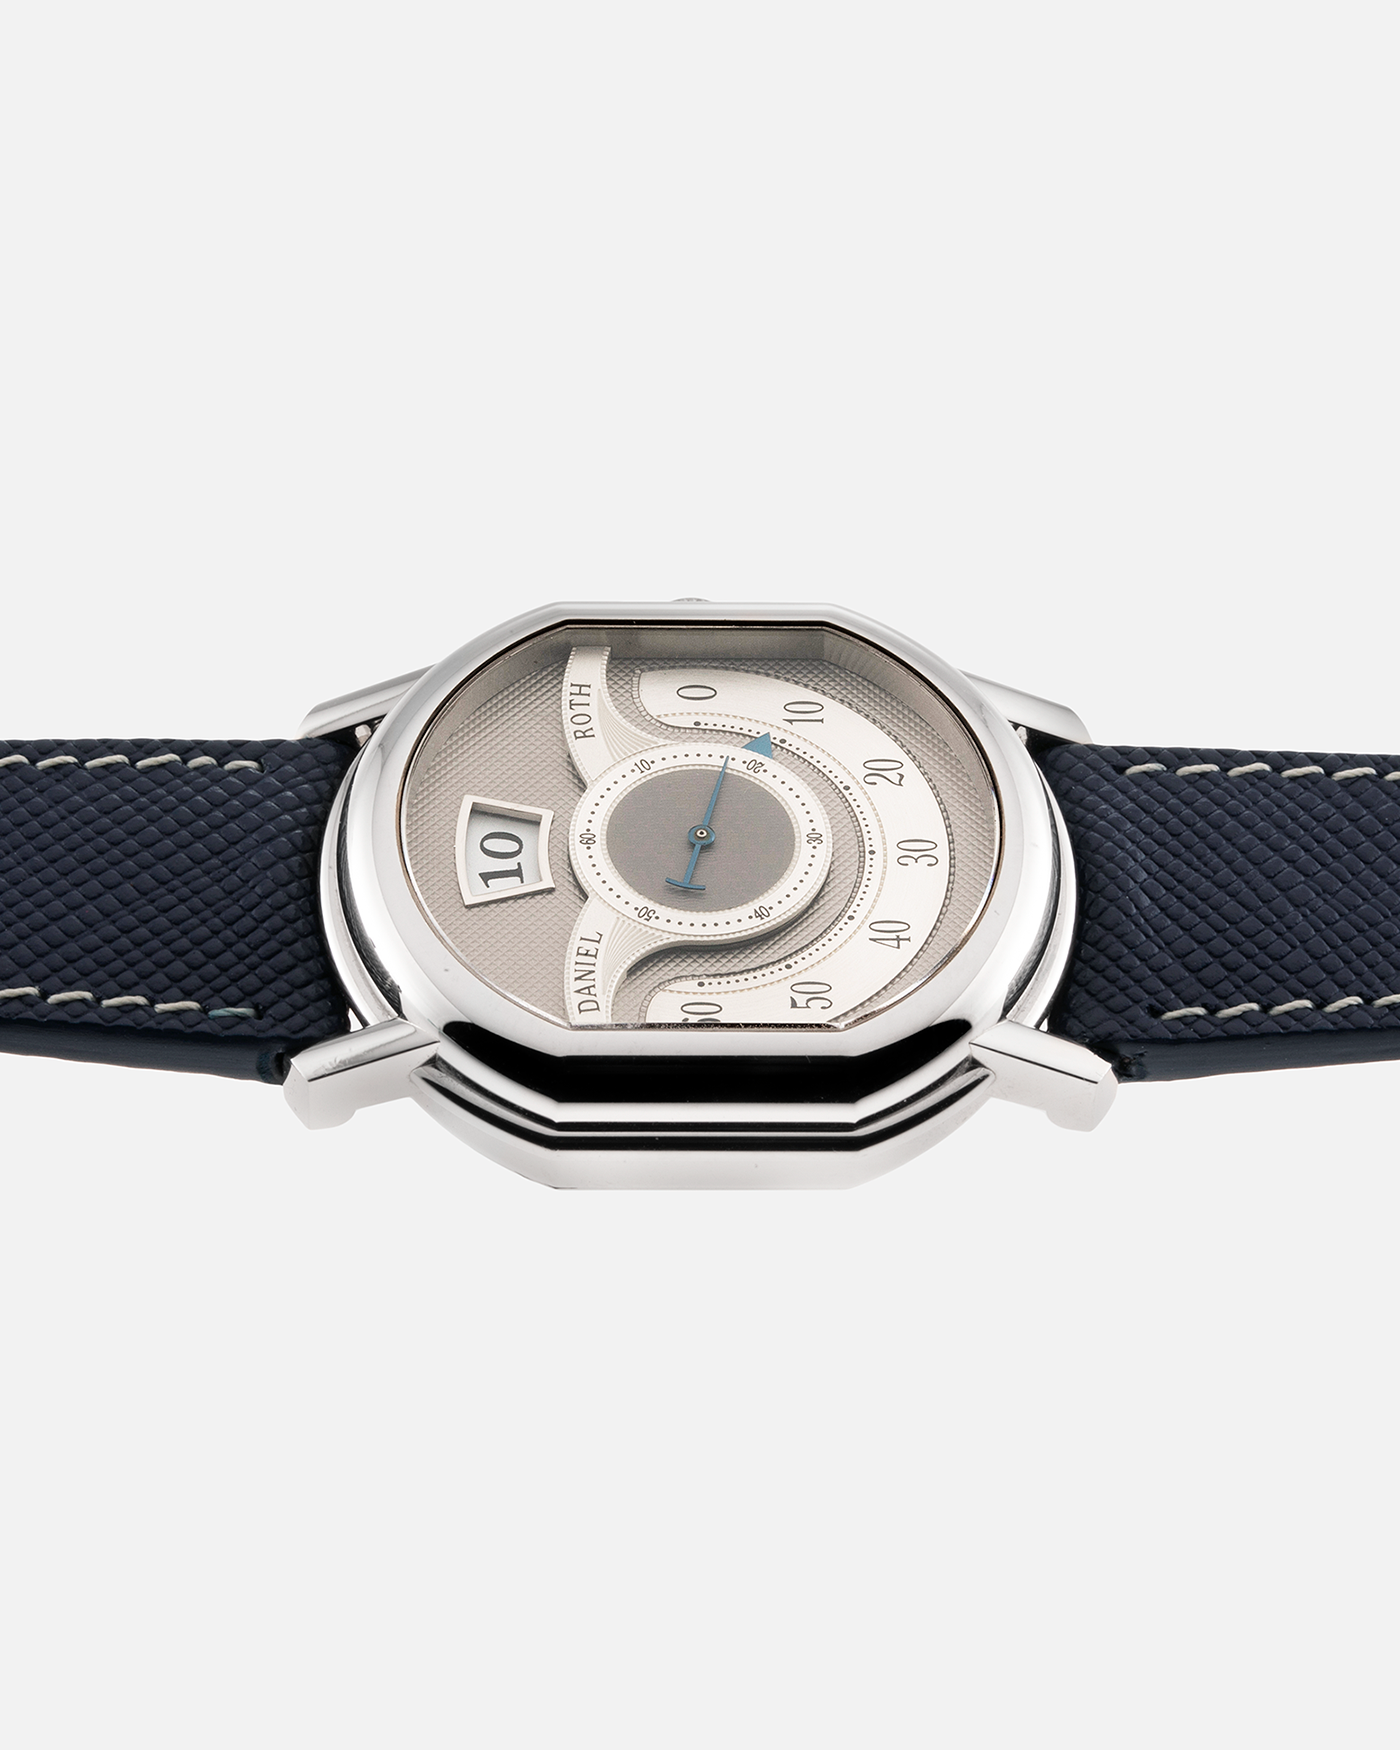 Brand: Daniel Roth Year: 1999 Model: 10th Anniversary Papillon, Limited Edition (White Gold in 110 pieces) Material: 18-carat White Gold Movement: Daniel Roth Cal. DR113, Self-Winding Case Diameter: 35mm x 41mm x 11mm Bracelet/Strap: Navy Blue Saffiano Leather Strap with Signed 18-carat White Gold Tang Buckle